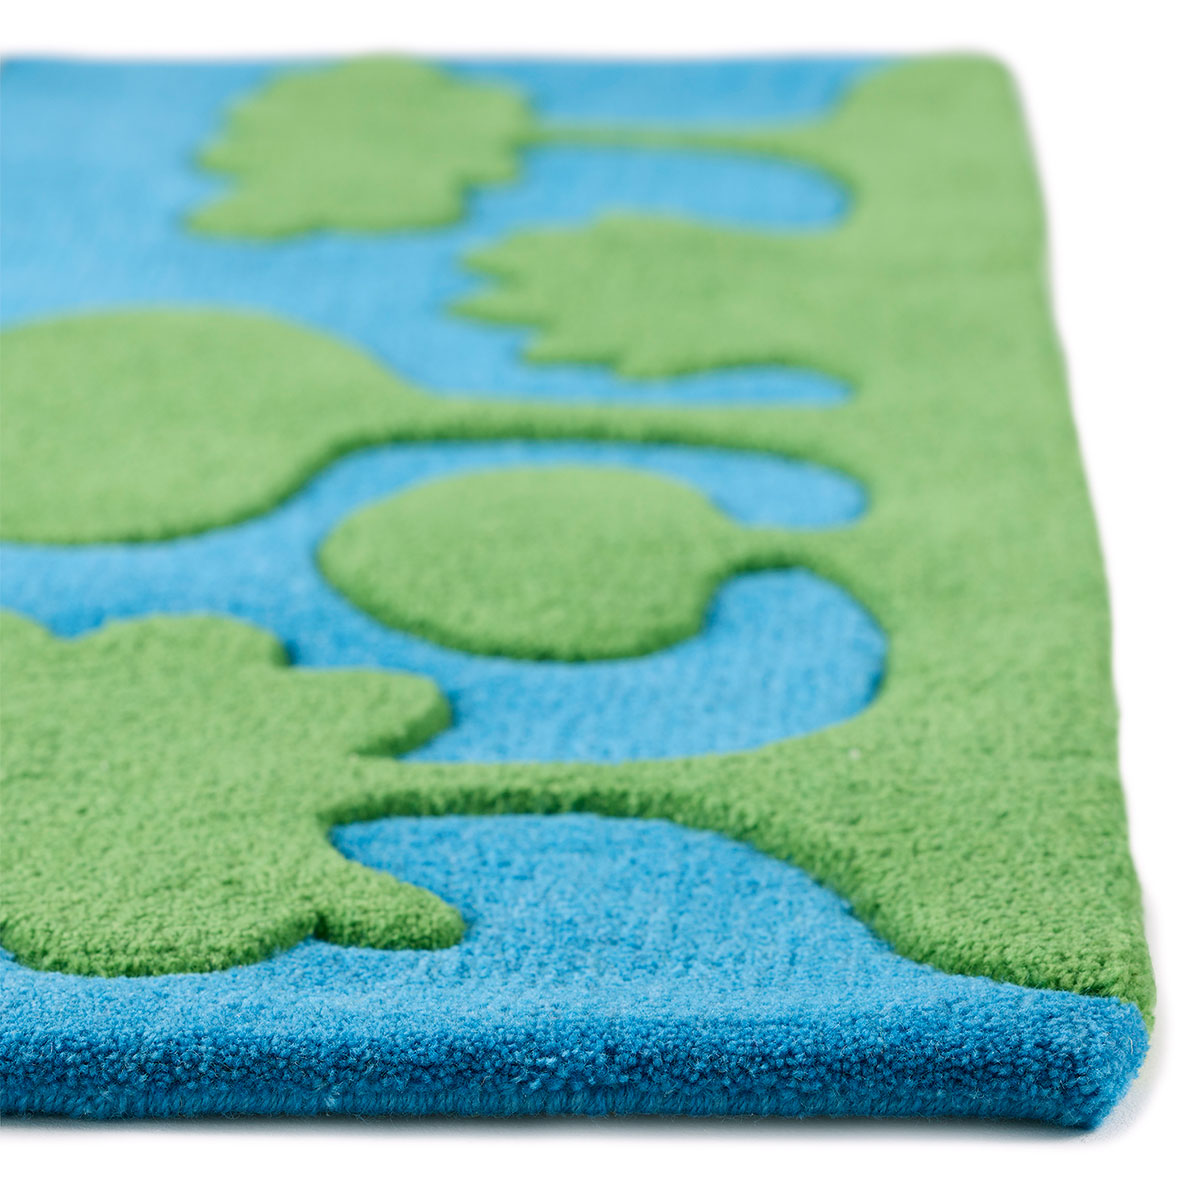 The corner of a small rug with green trees and blue sky.